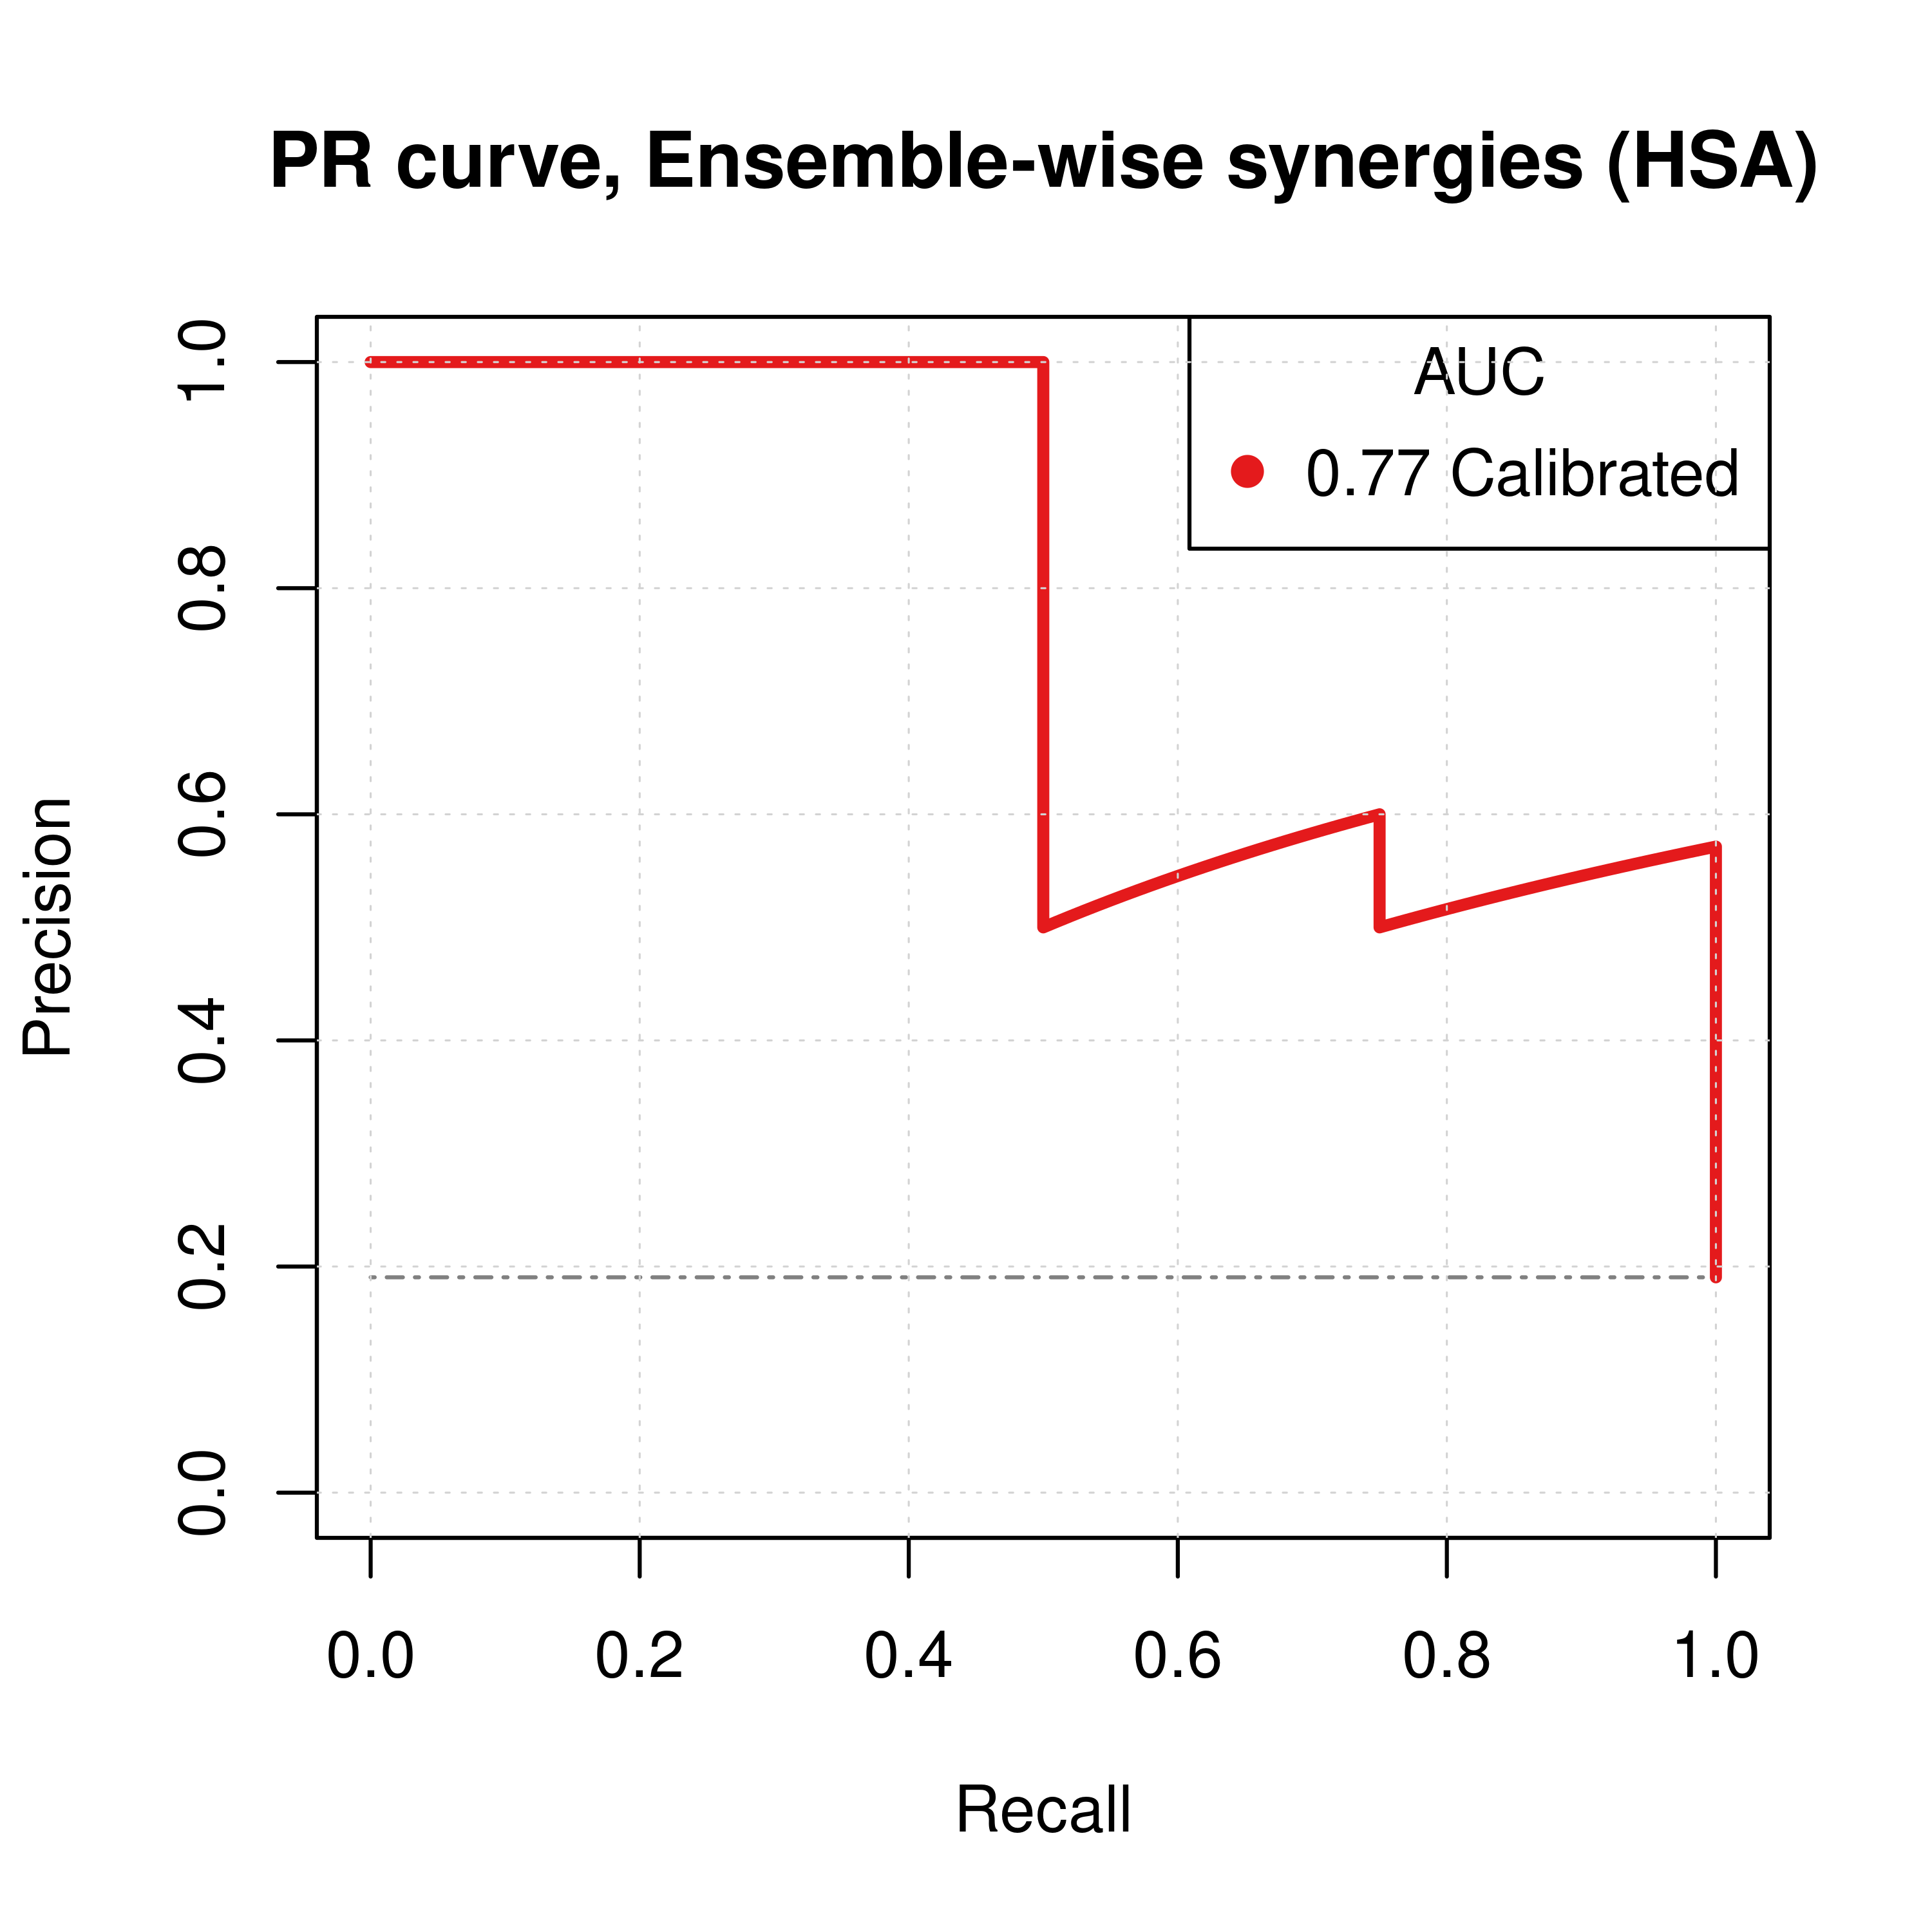 PR curve (CASCADE 1.0, HSA synergy method, 150 models calibrated to the AGS steady state)